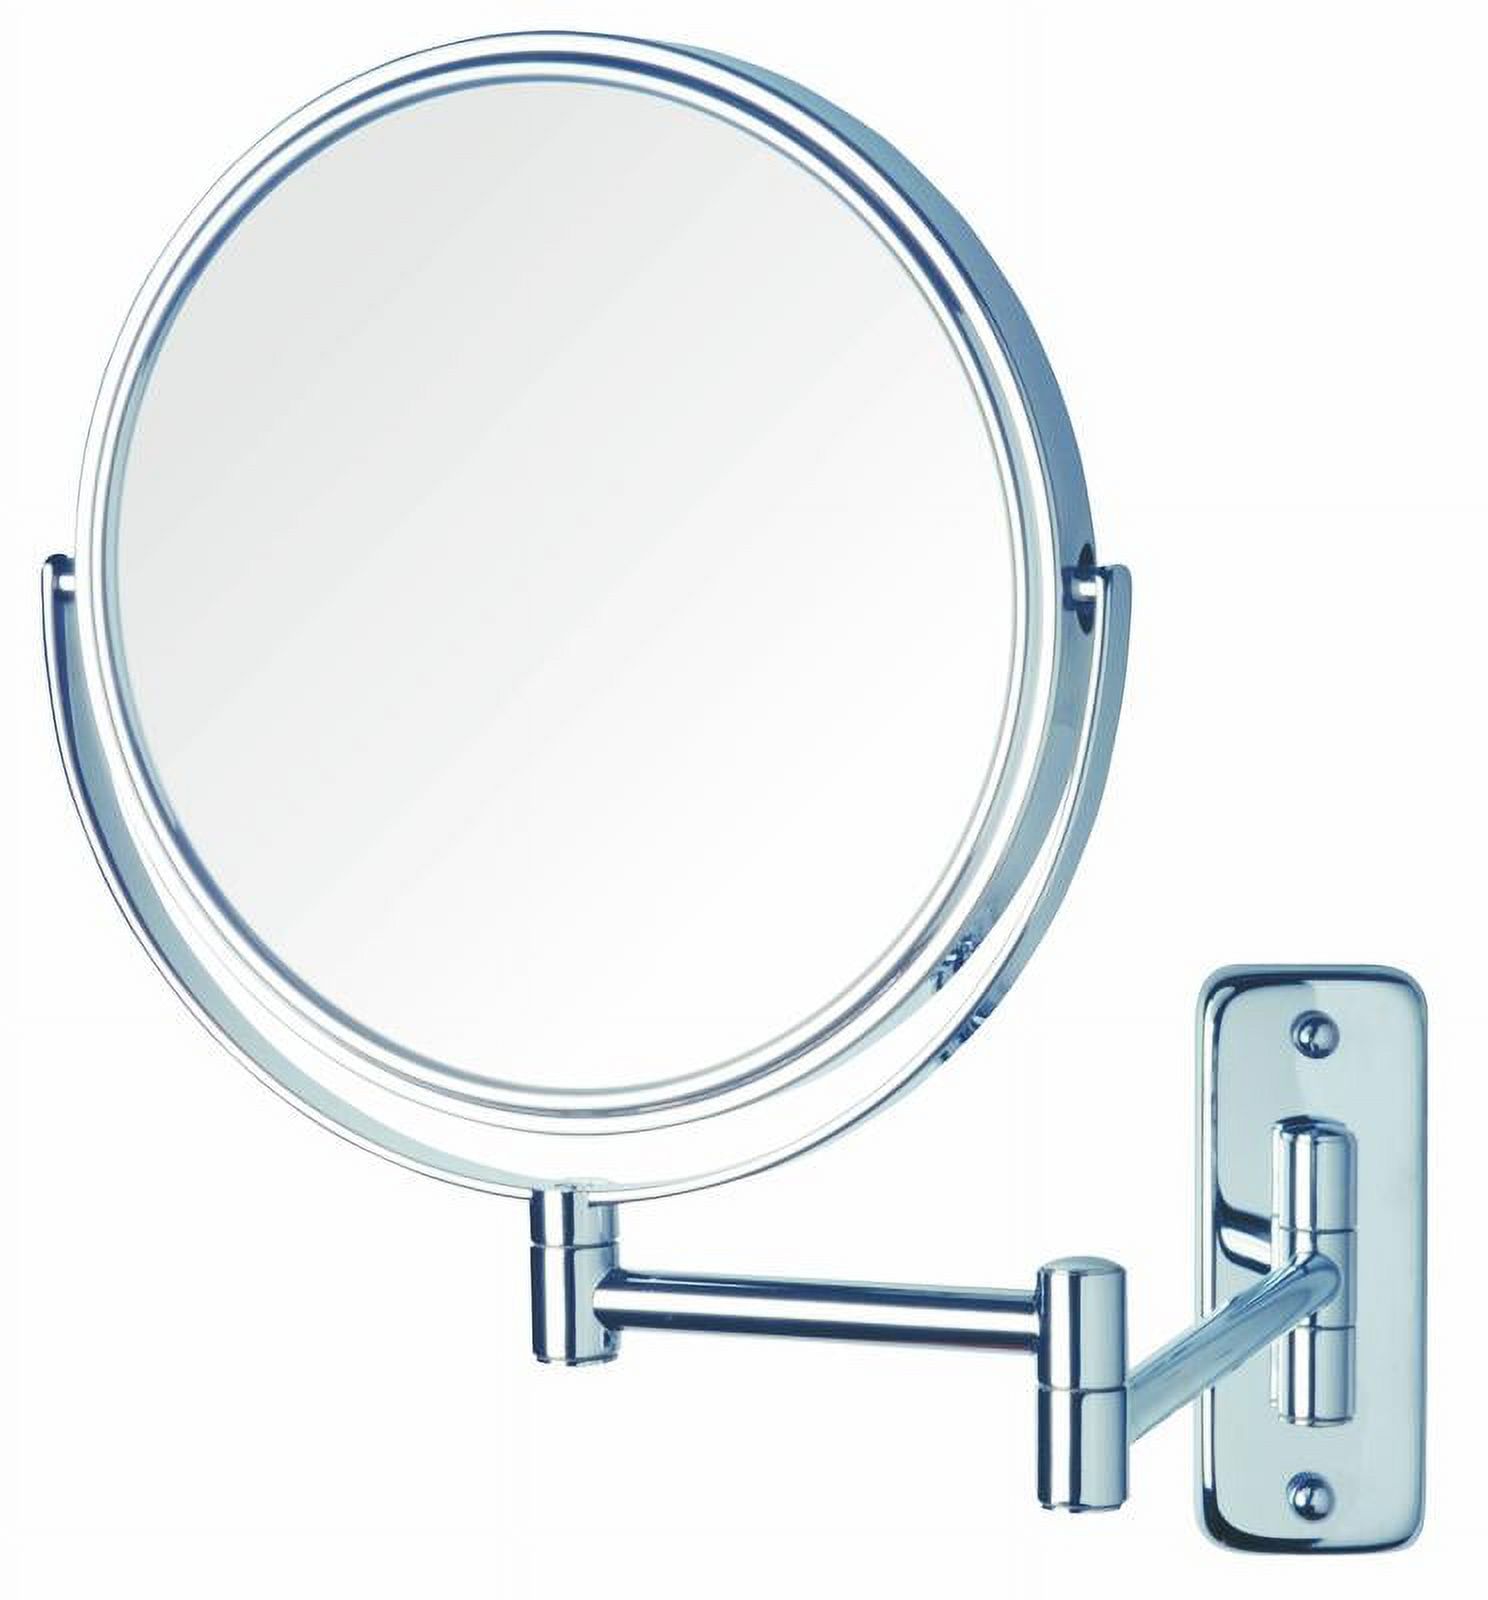 Jerdon 8 inch Diameter Two-Sided Wall-Mounted Makeup Mirror with 8X-1X Magnification, Chrome Finish - Model JP7808C - image 1 of 8